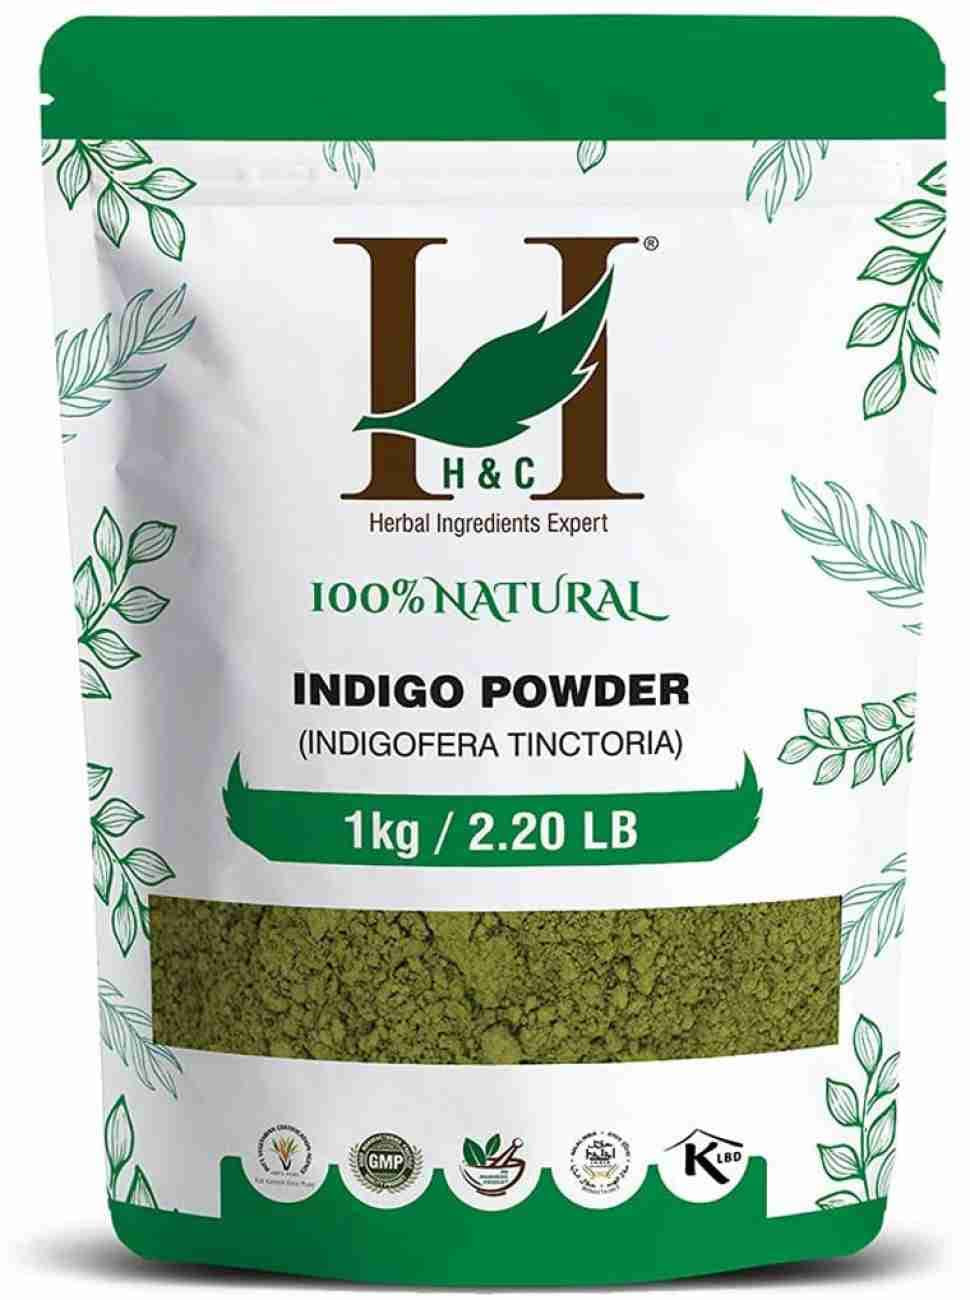 100% Natural Indigo Powder for Hair- 1 KG (2.2 LB) Value Pack - For coloring hair from black naturally